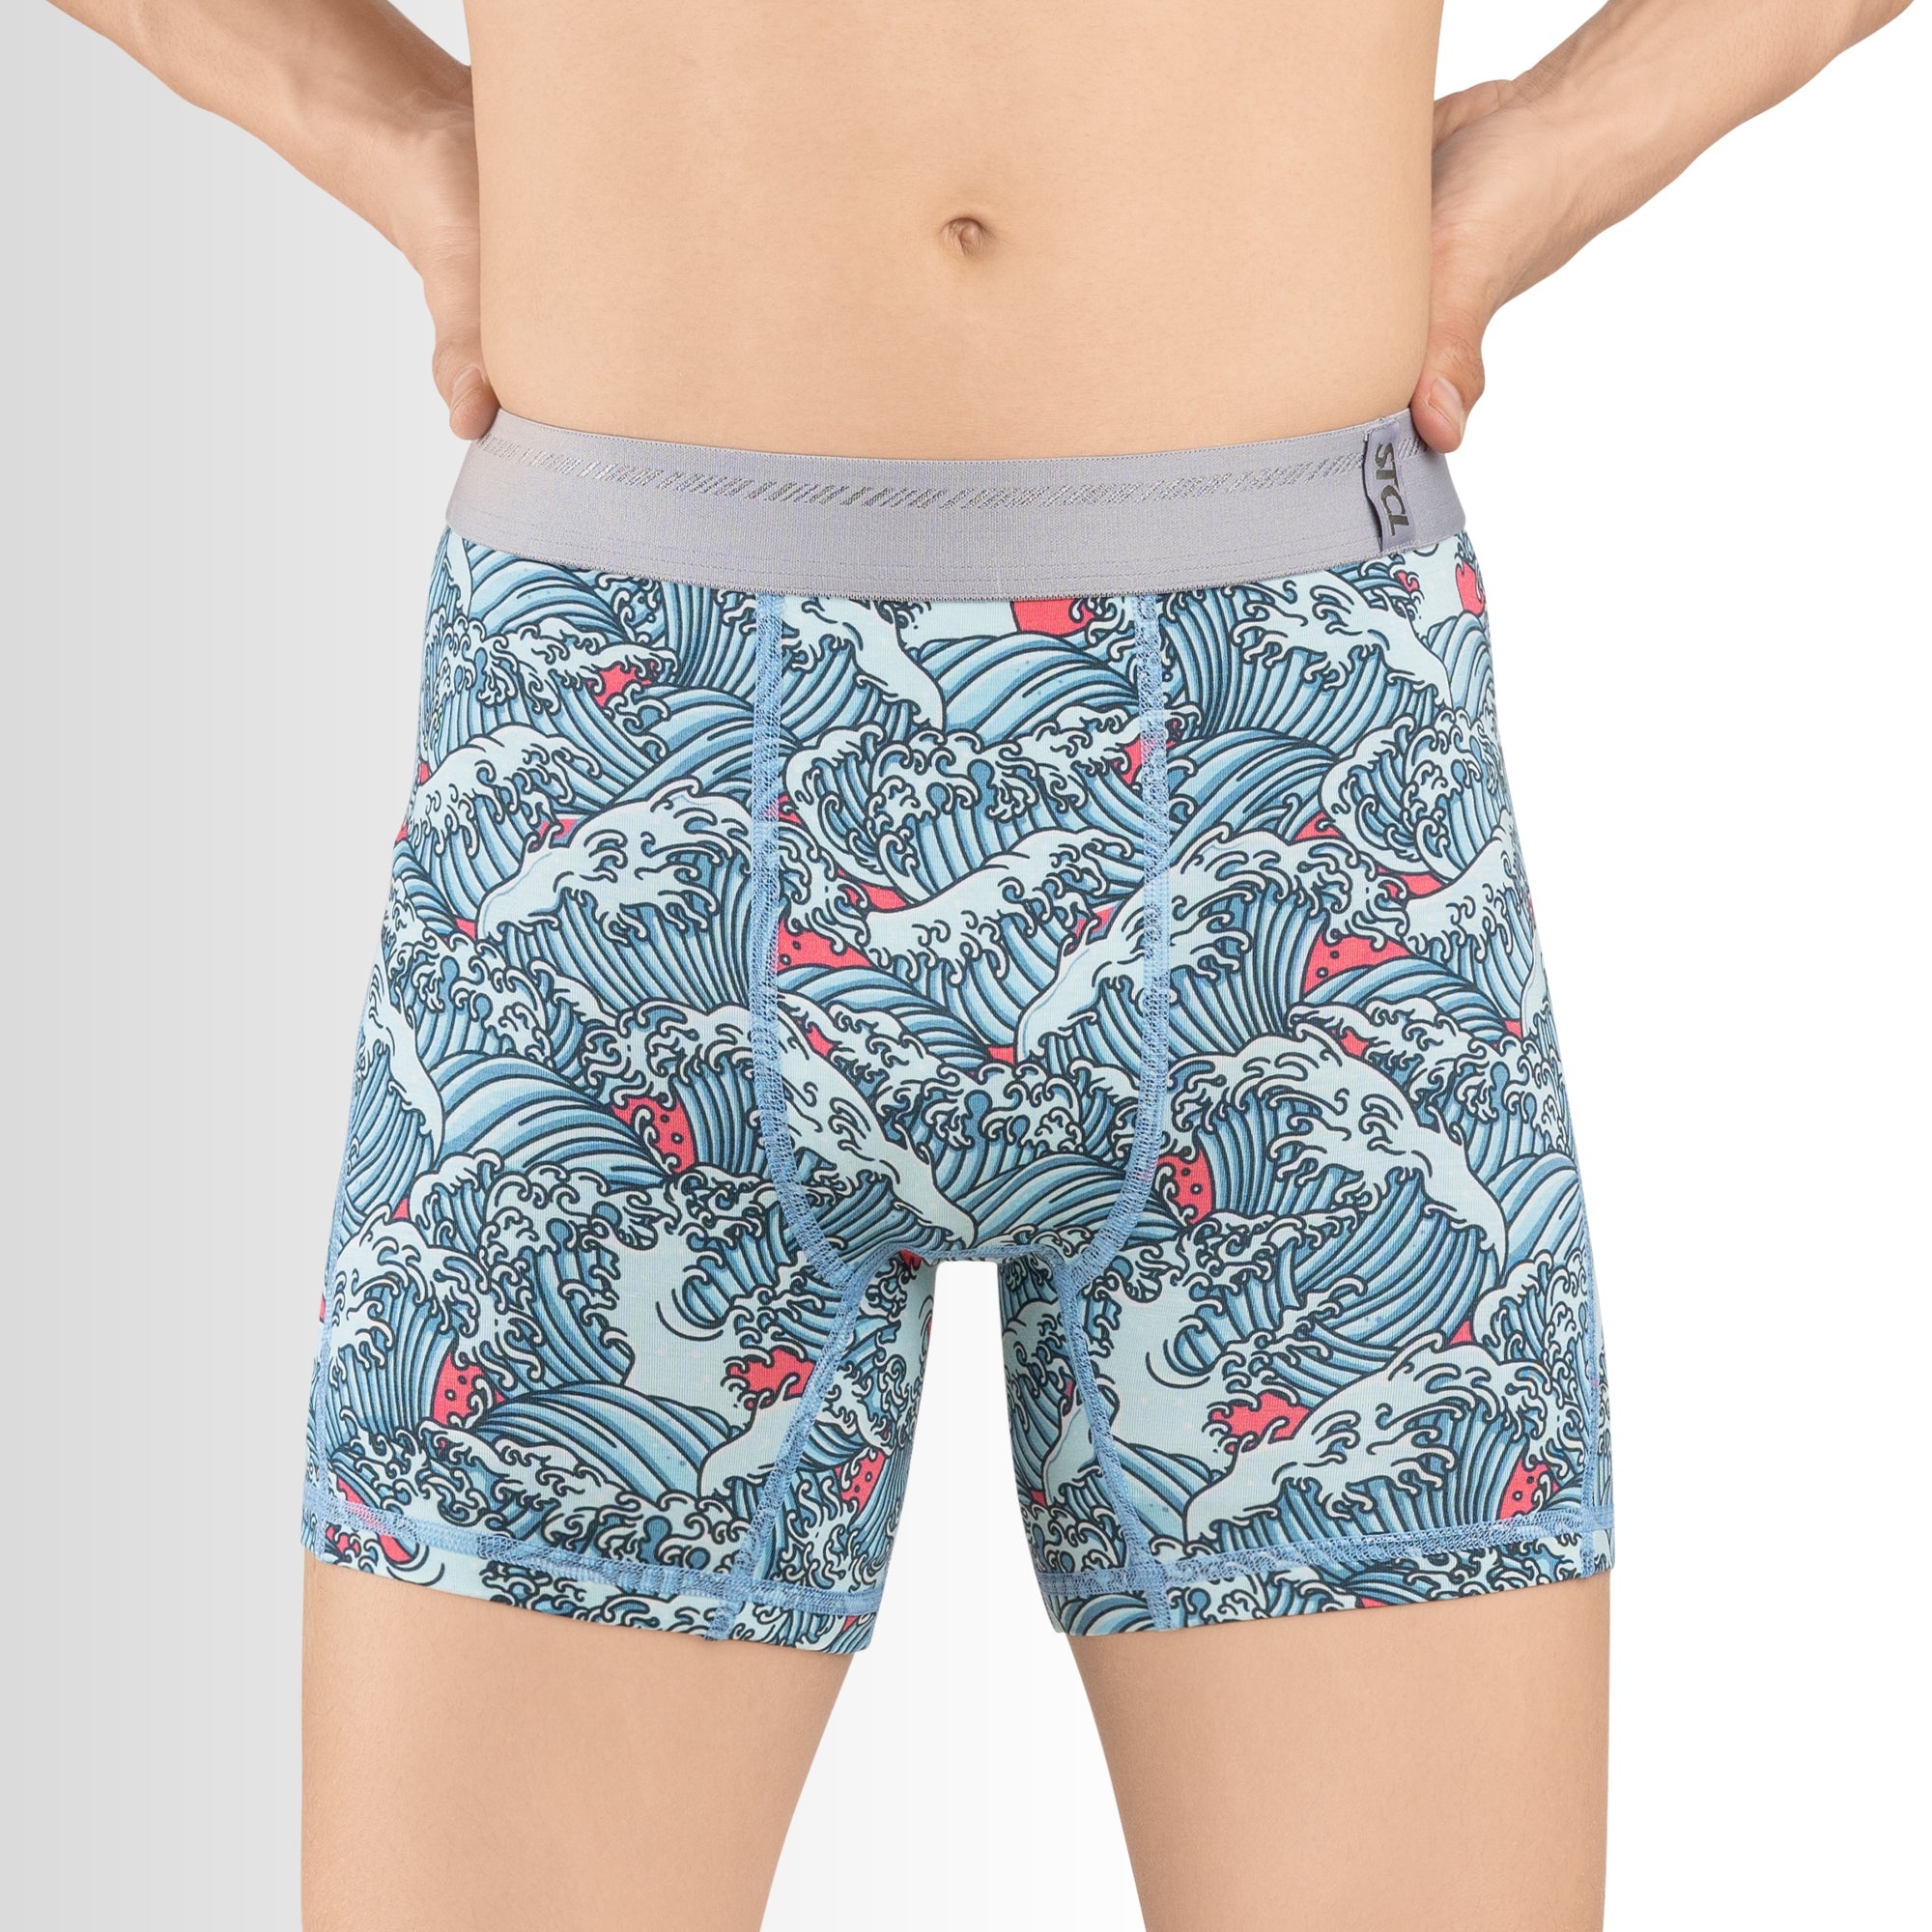 BOXER BRIEF - COOL WAVES